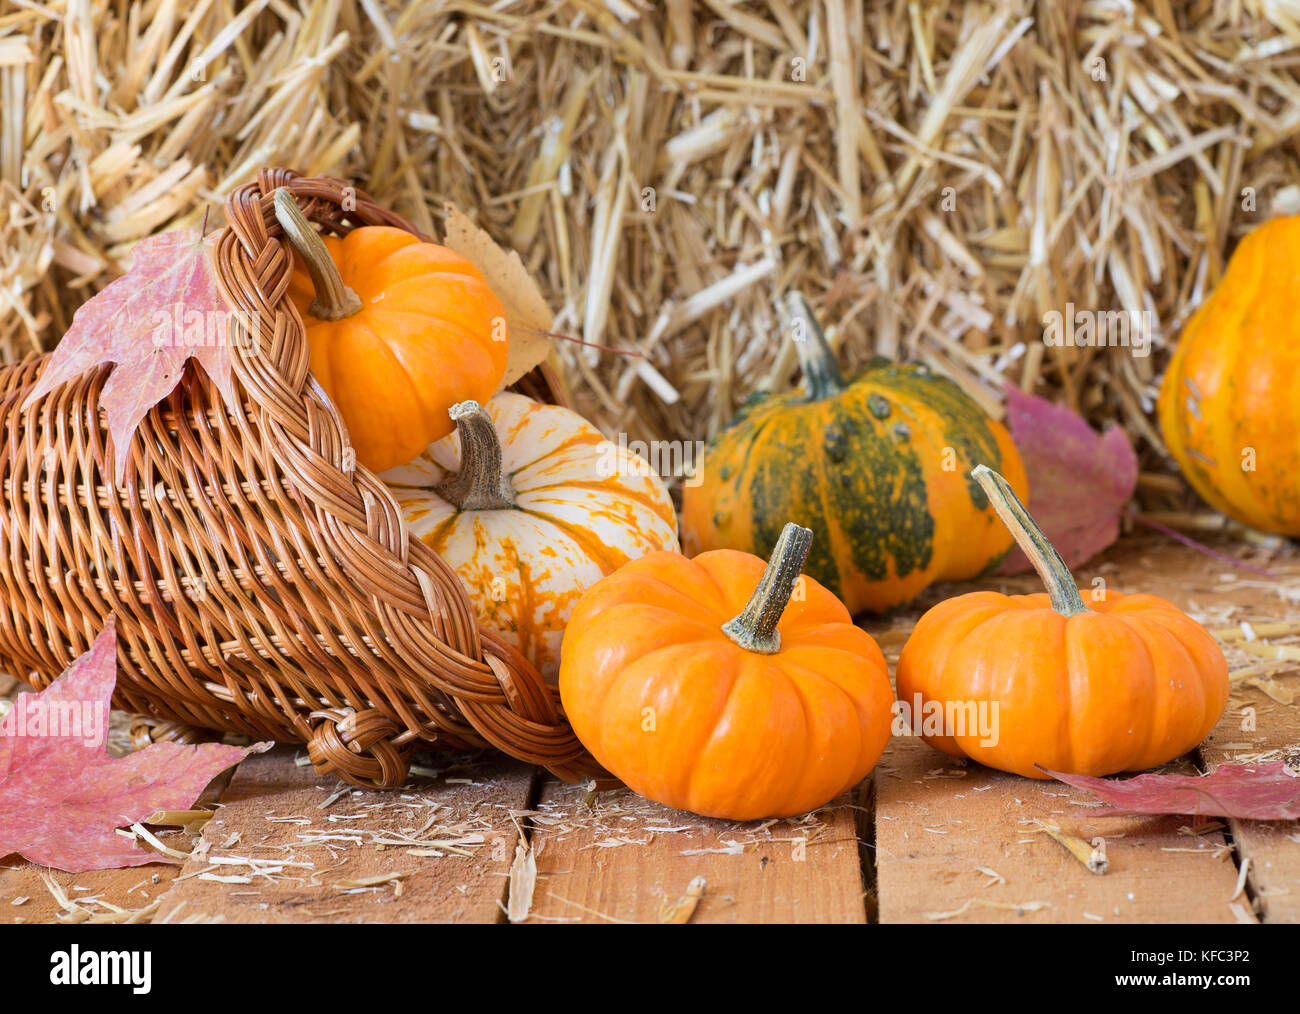 Colorful pumpkins and gourds in a basket with a straw bale background Stock Photo